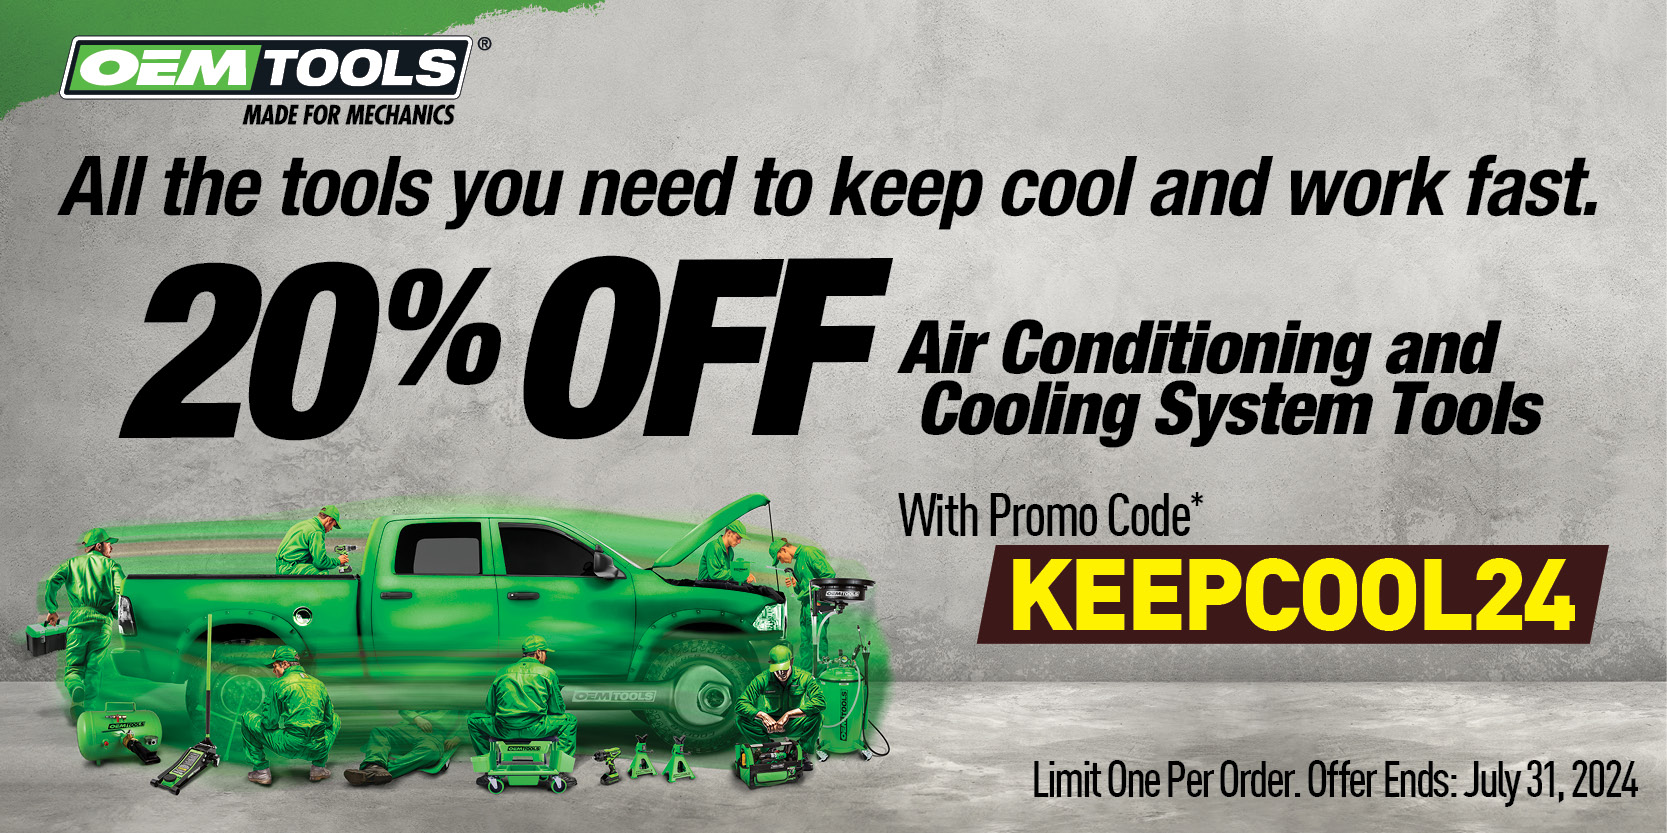 Get 20% Off OEMTOOLS Air Conditioning and Cooling System Tools with promo code KEEPCOOL24